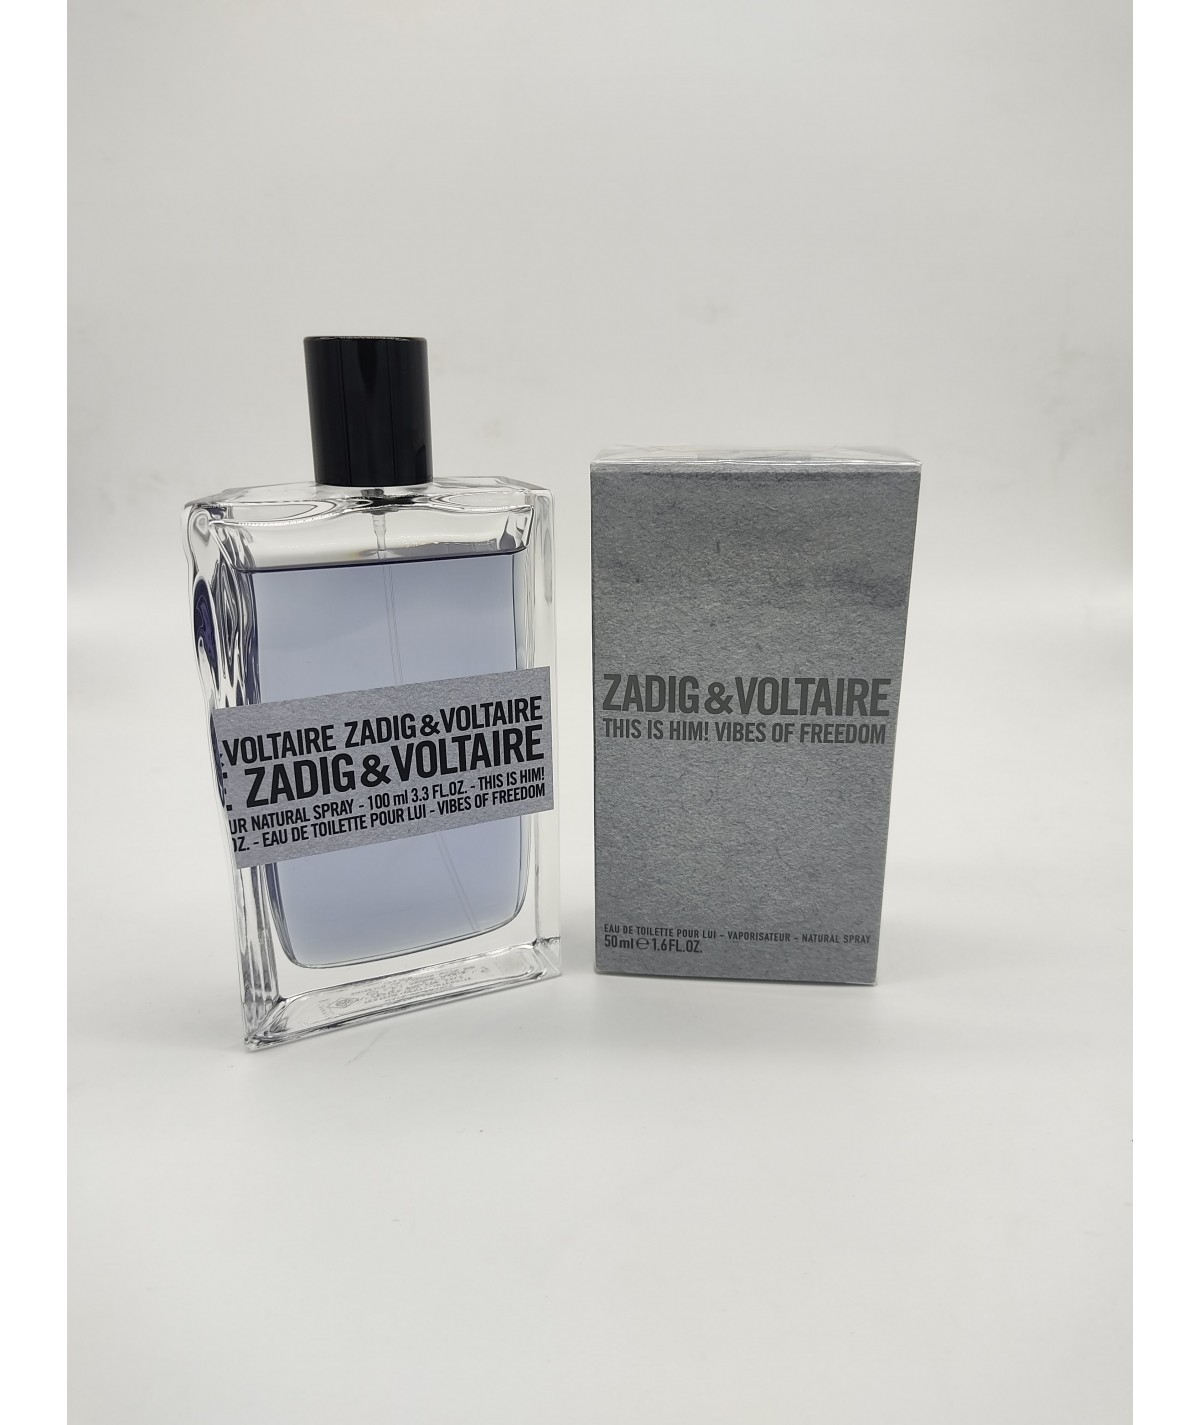 ZADIG & VOLTAIRE - THIS IS HIM! VIBES OF FREEDOM EDT 50ml